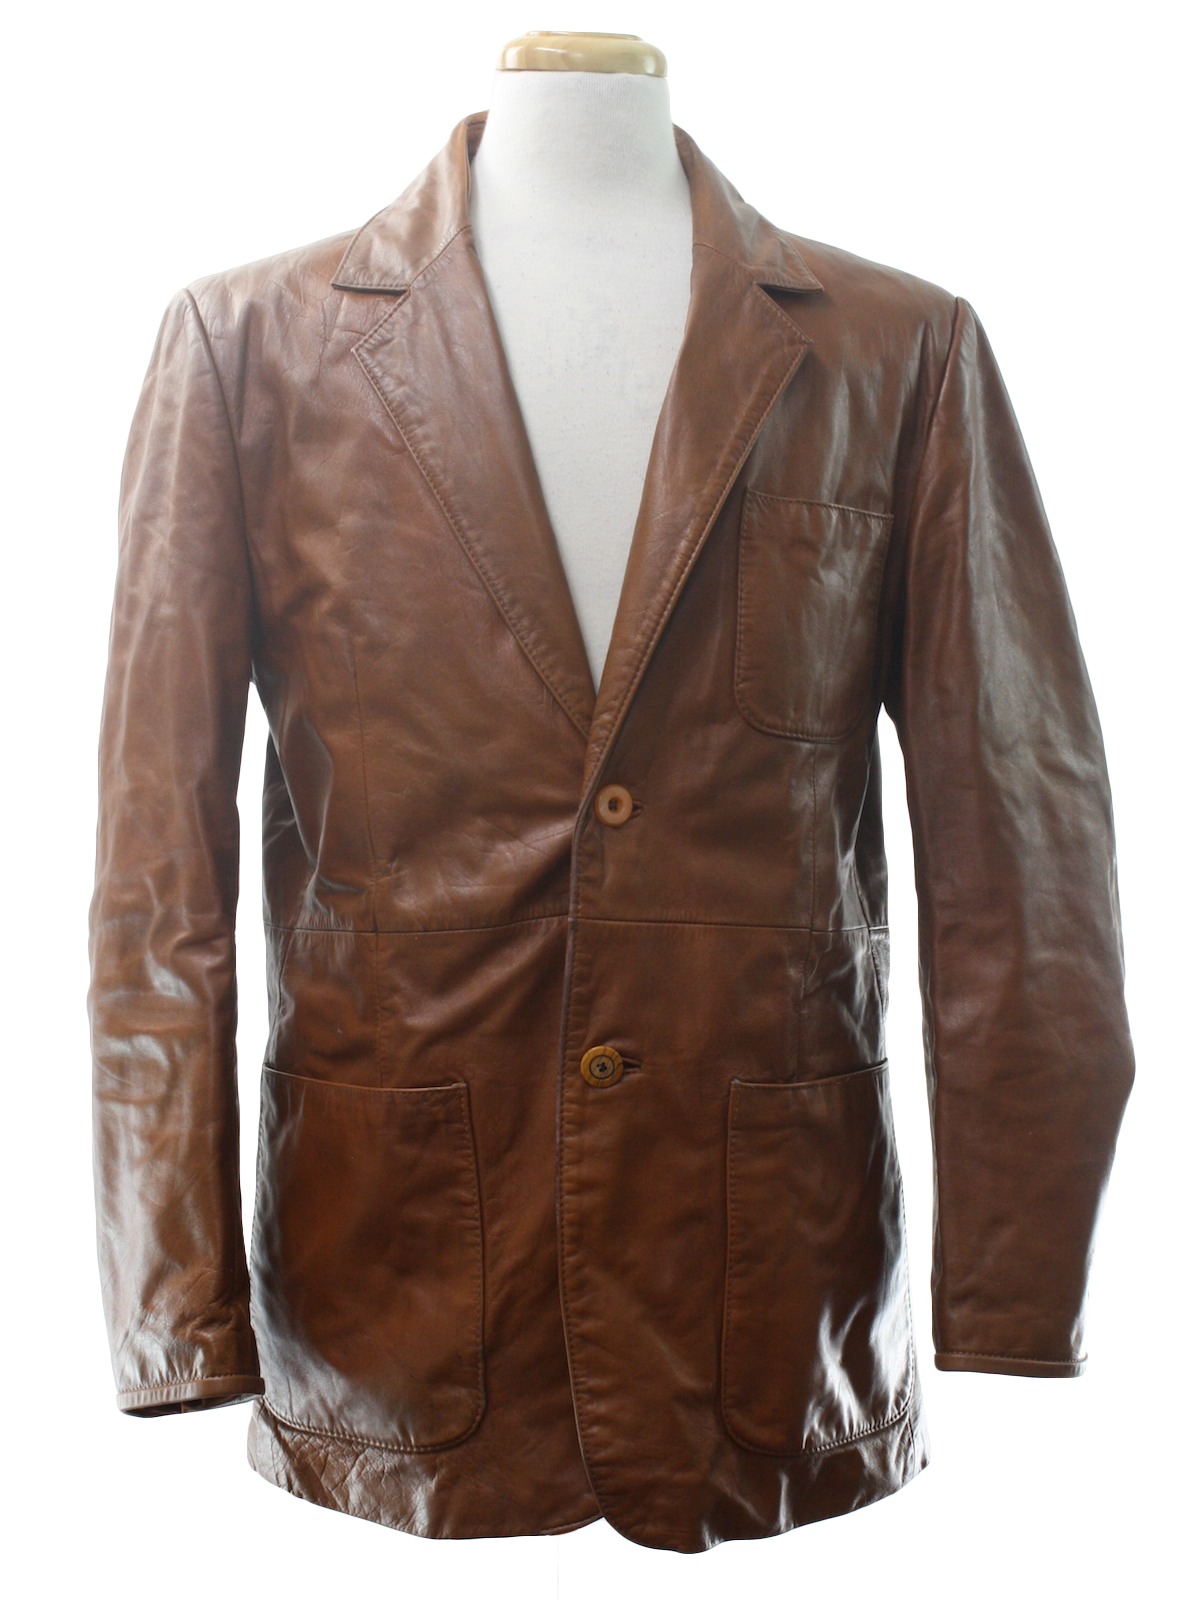 1960's Retro Leather Jacket: Late 60s or early 70s -Fantastic ...